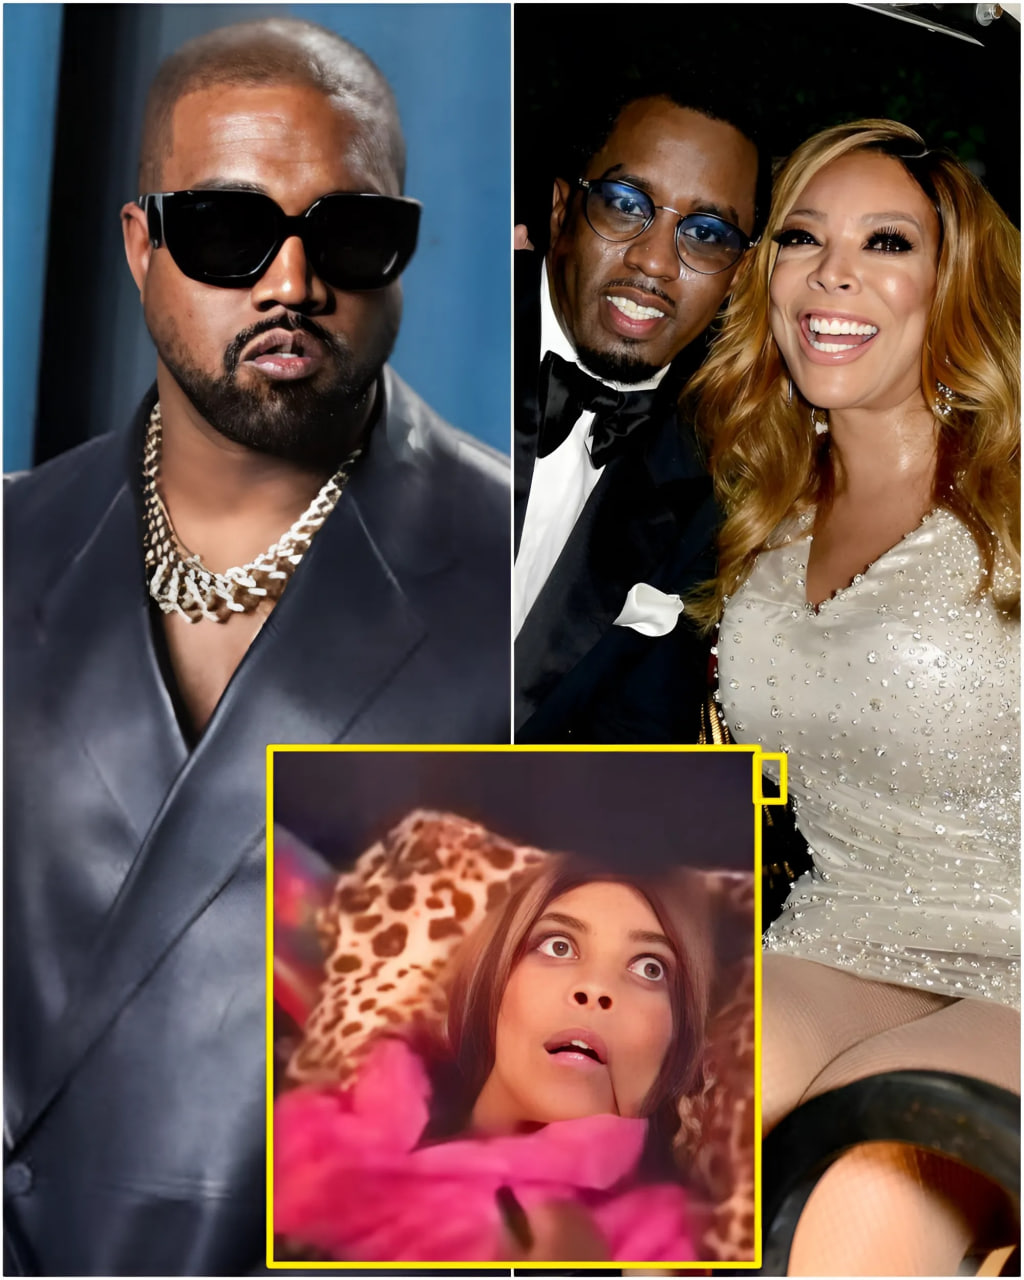 (VIDEO) ‘Crazy how they can freeze YOUR funds WTF’, What else does she have to loose. – Kanye West LEAKED Proofs Of Wendy William’s ELIMINATION Plan, She Has DIRT On Many Celebs